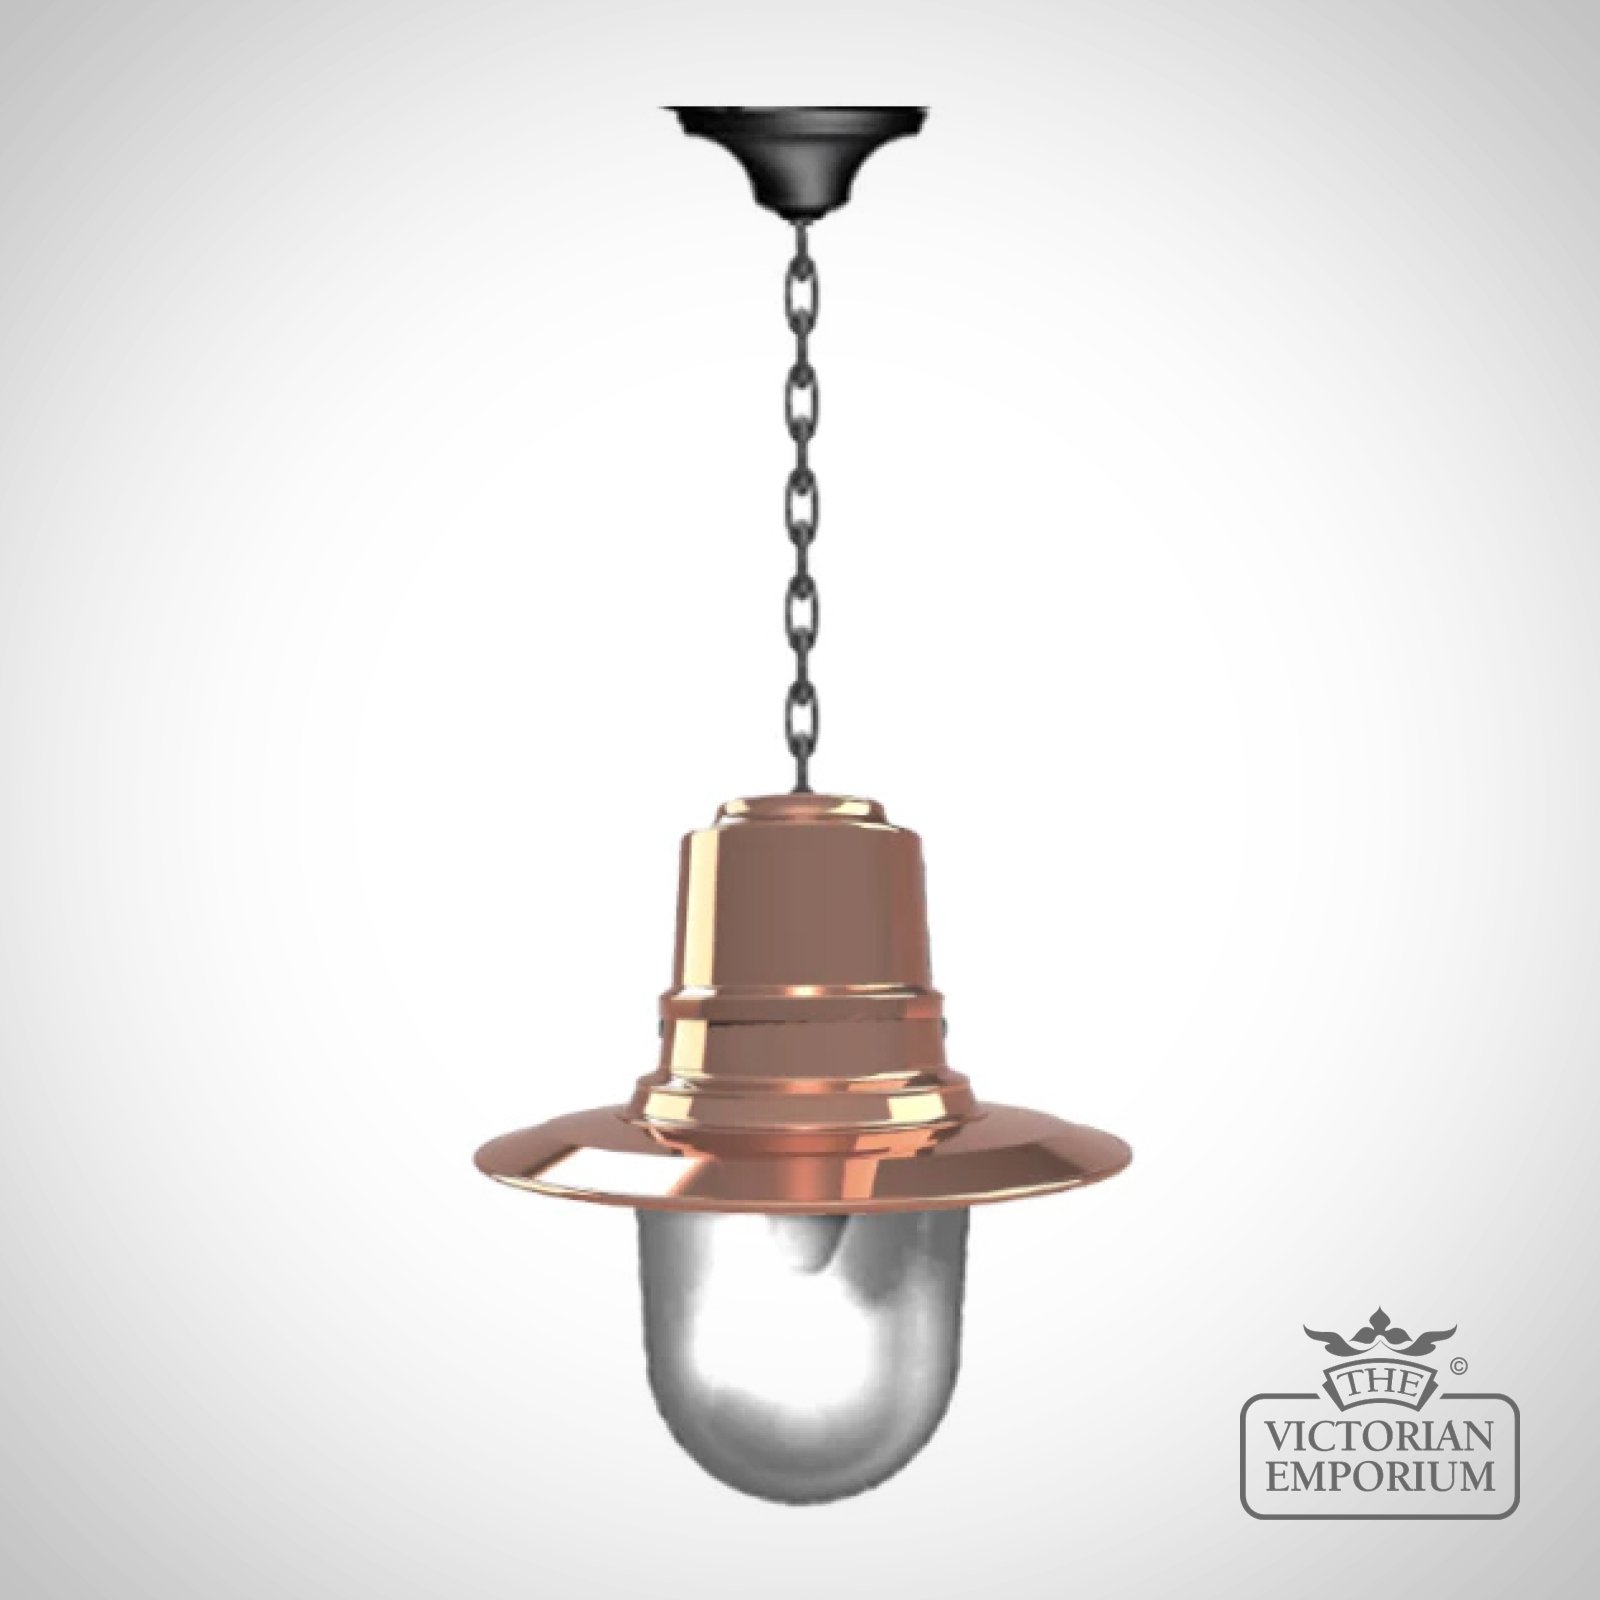 Station Master Copper Lantern on Chain in a Choice of 2 Sizes